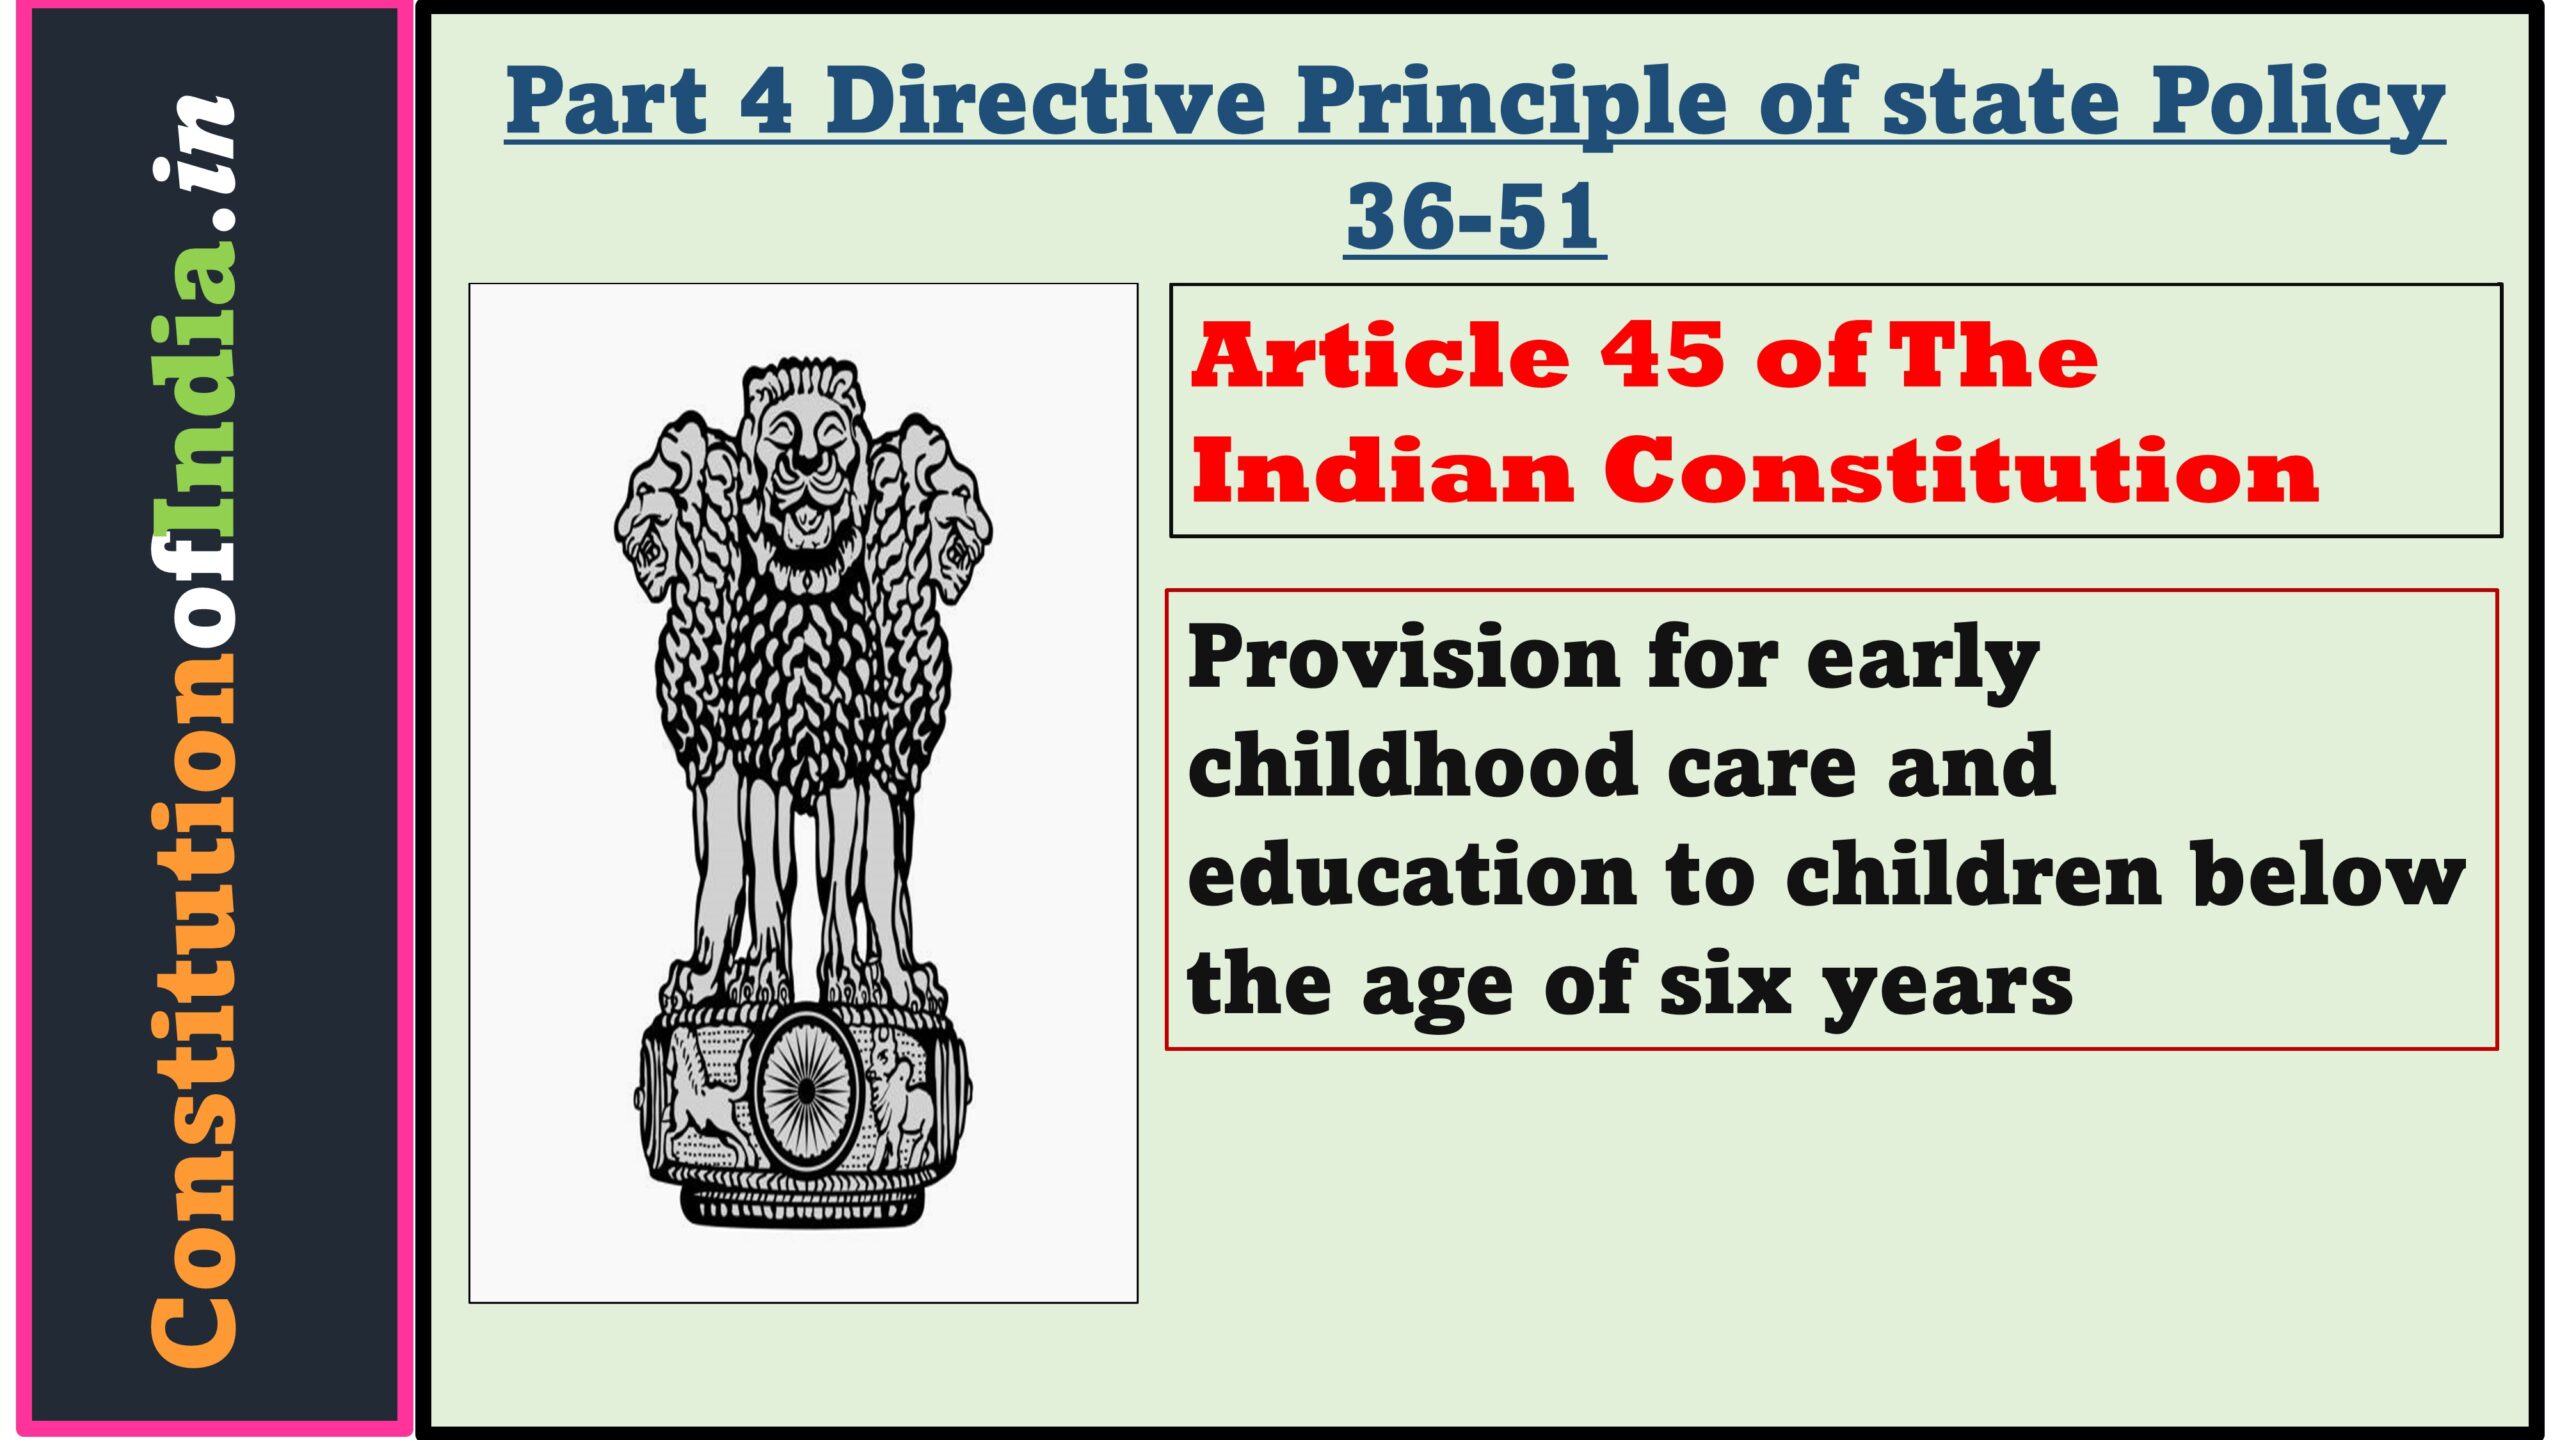 Article 45 of Indian Constitution: Provision for free and compulsory education for children 